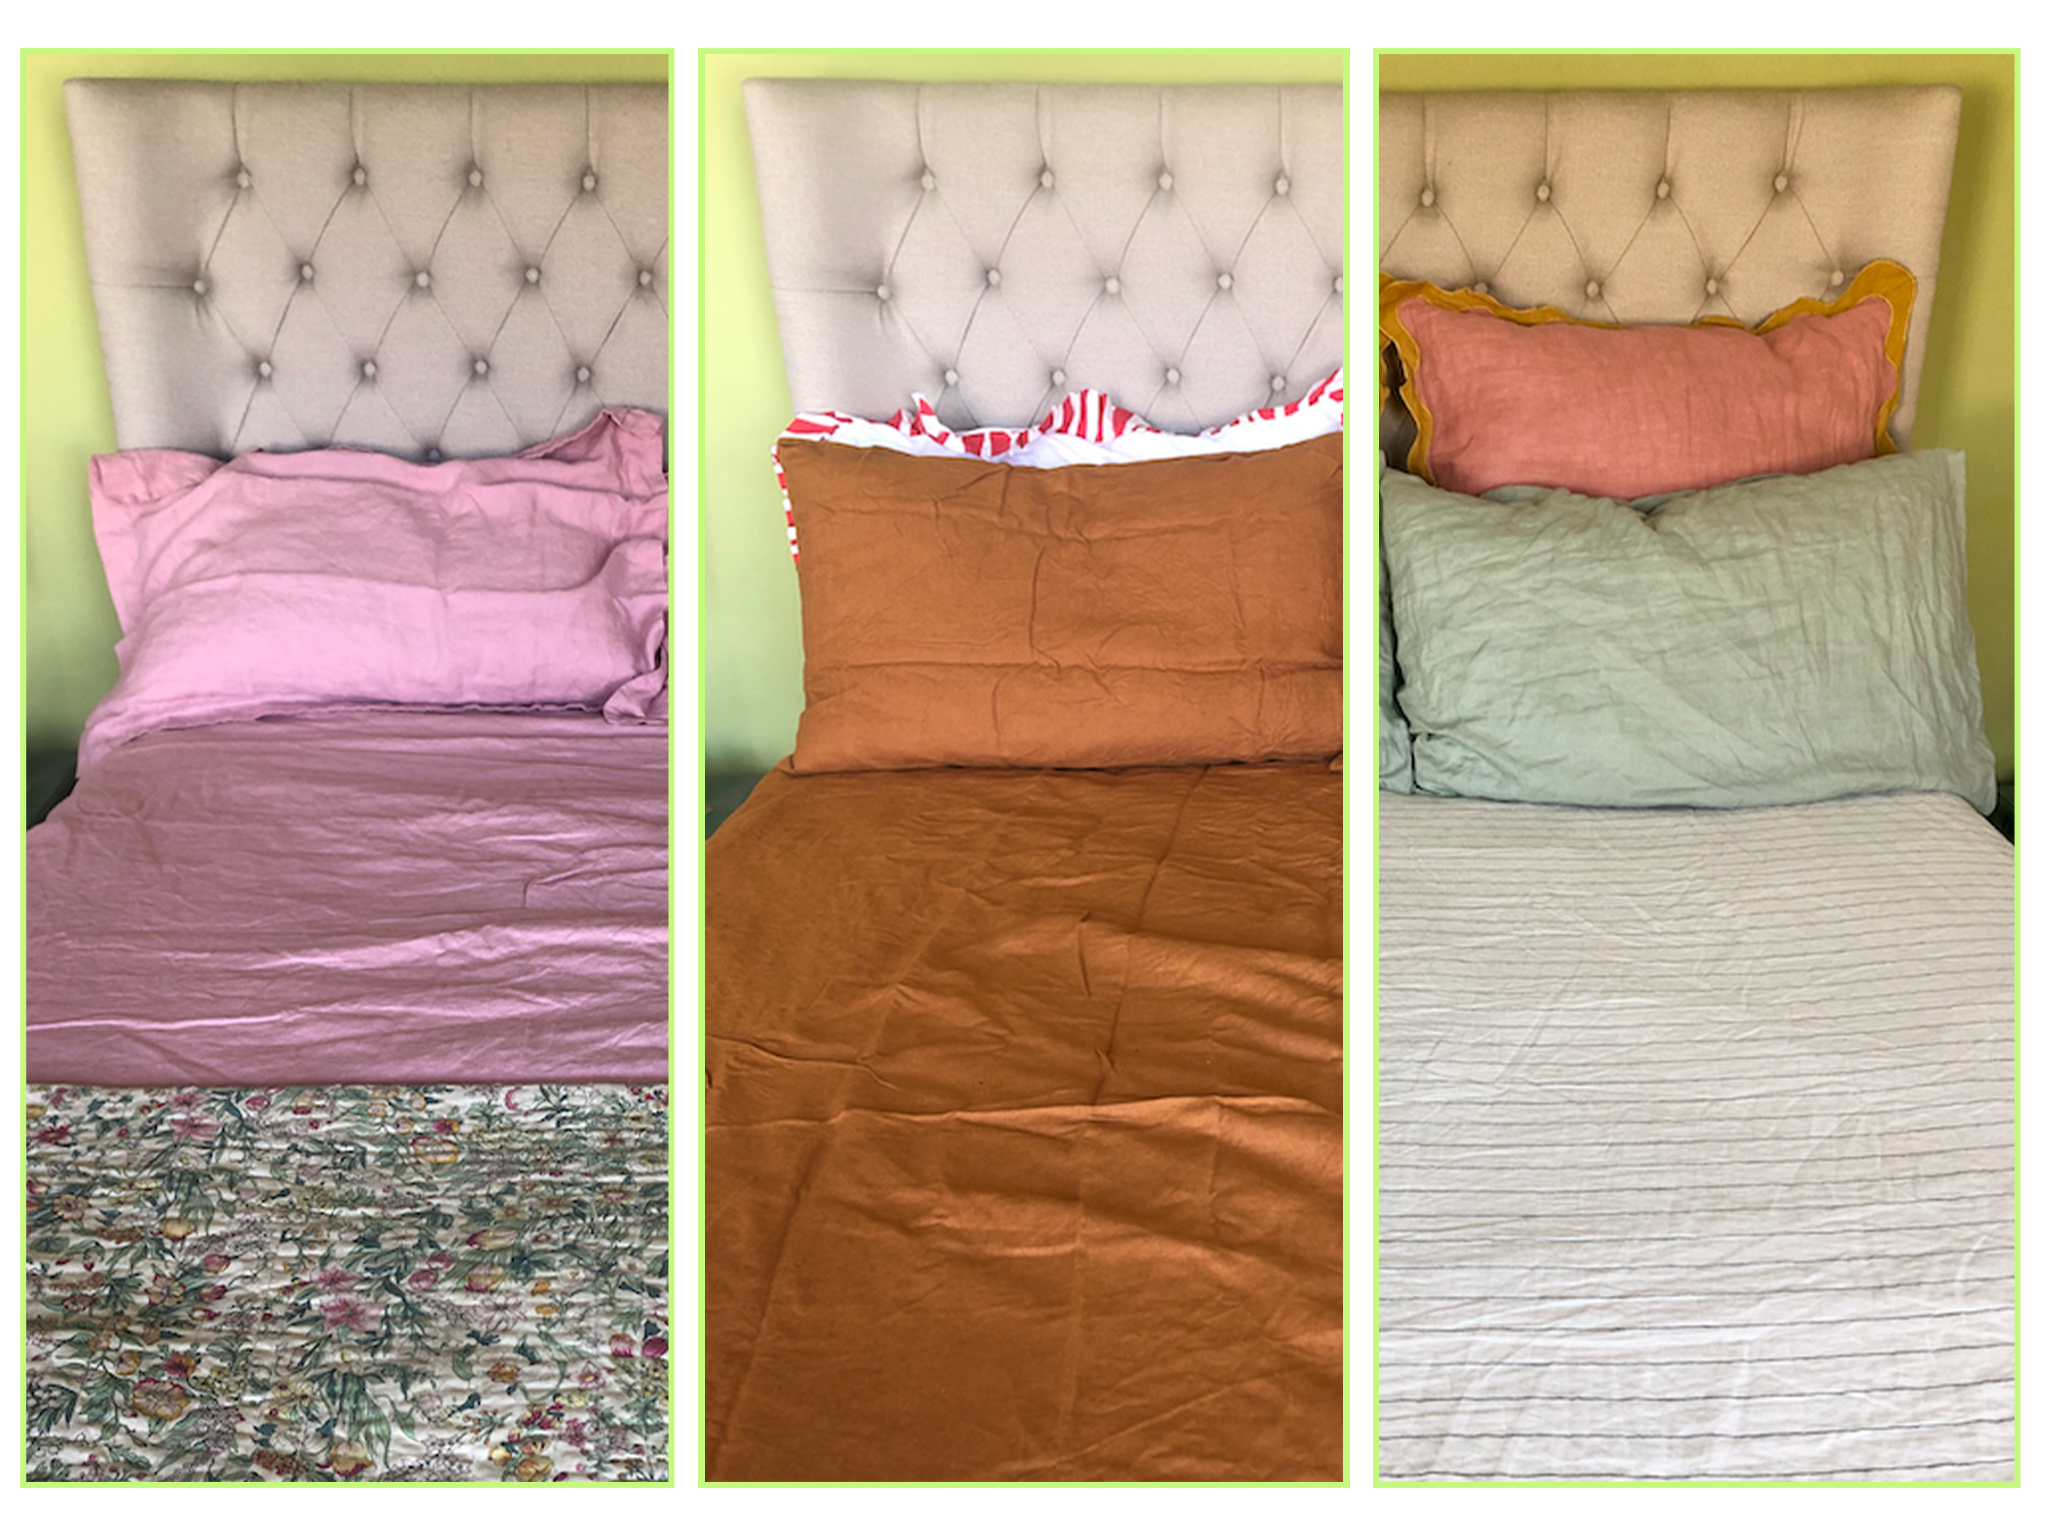 A selection of the dreamy linen bedding sets we tested